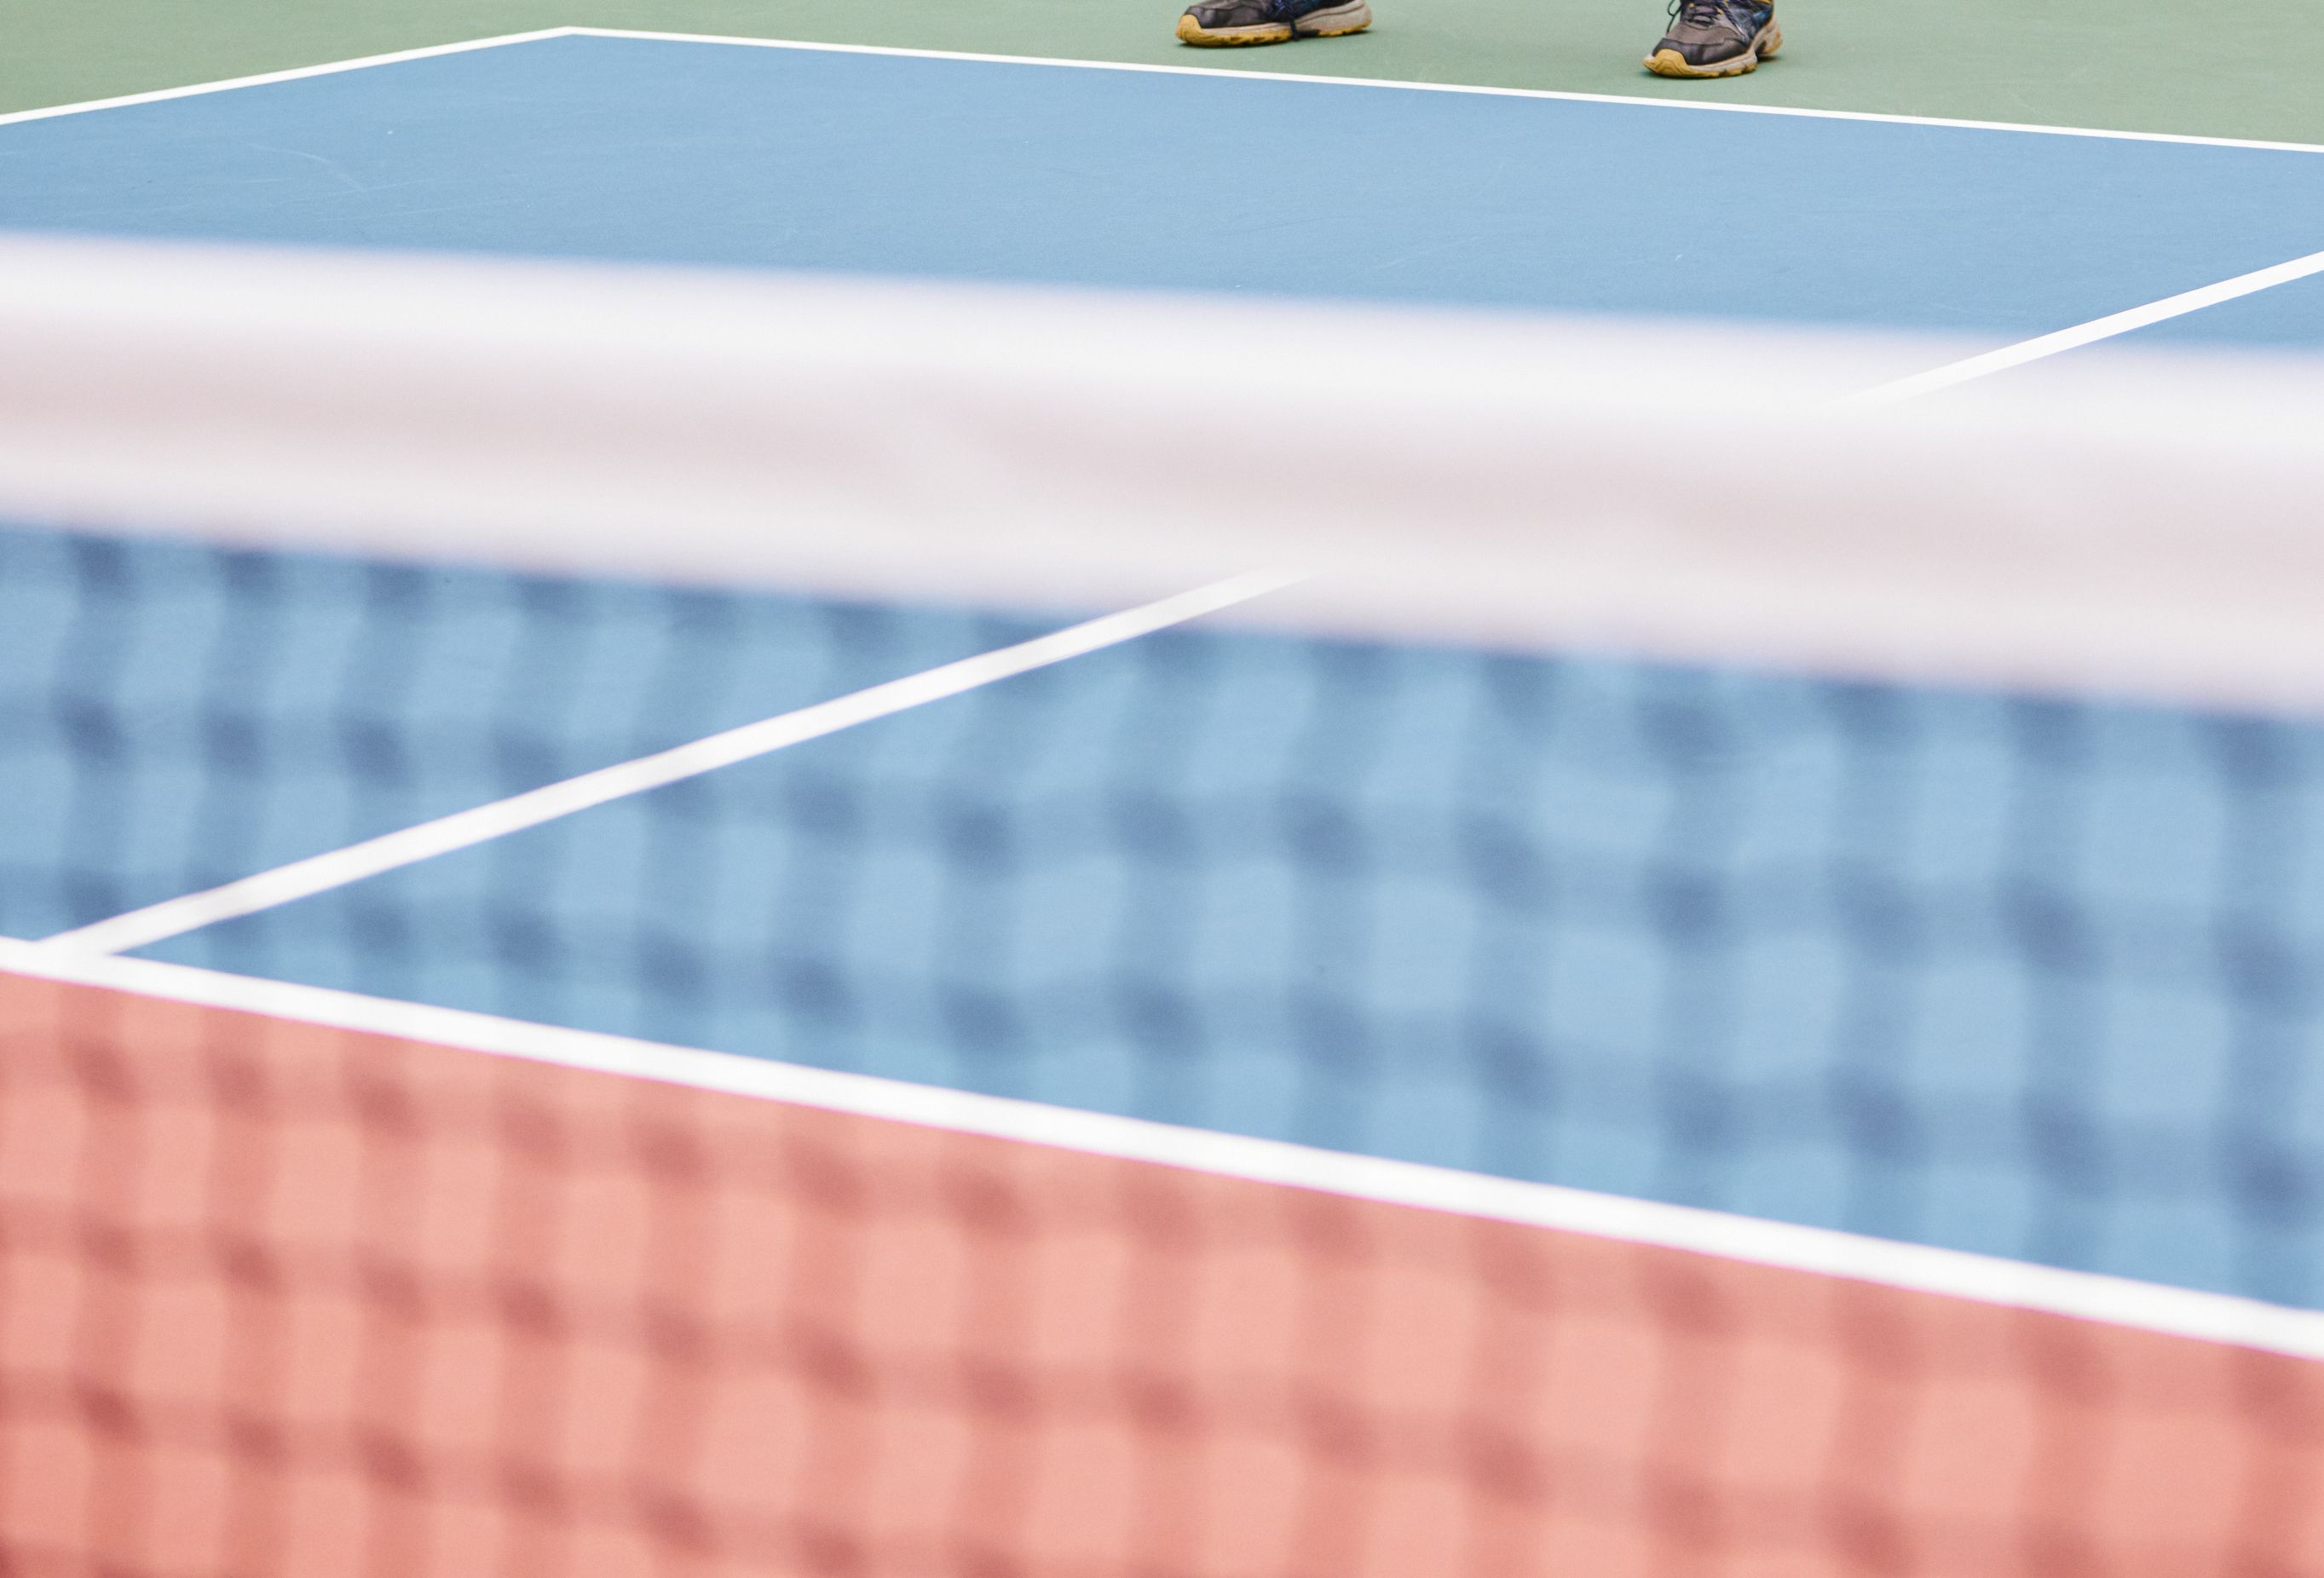 If you have a backyard court or slab you’d like to convert into a pickleball court, or need to add lines to an existing court near you, here are some DIY tips on how to tape a pickleball court.